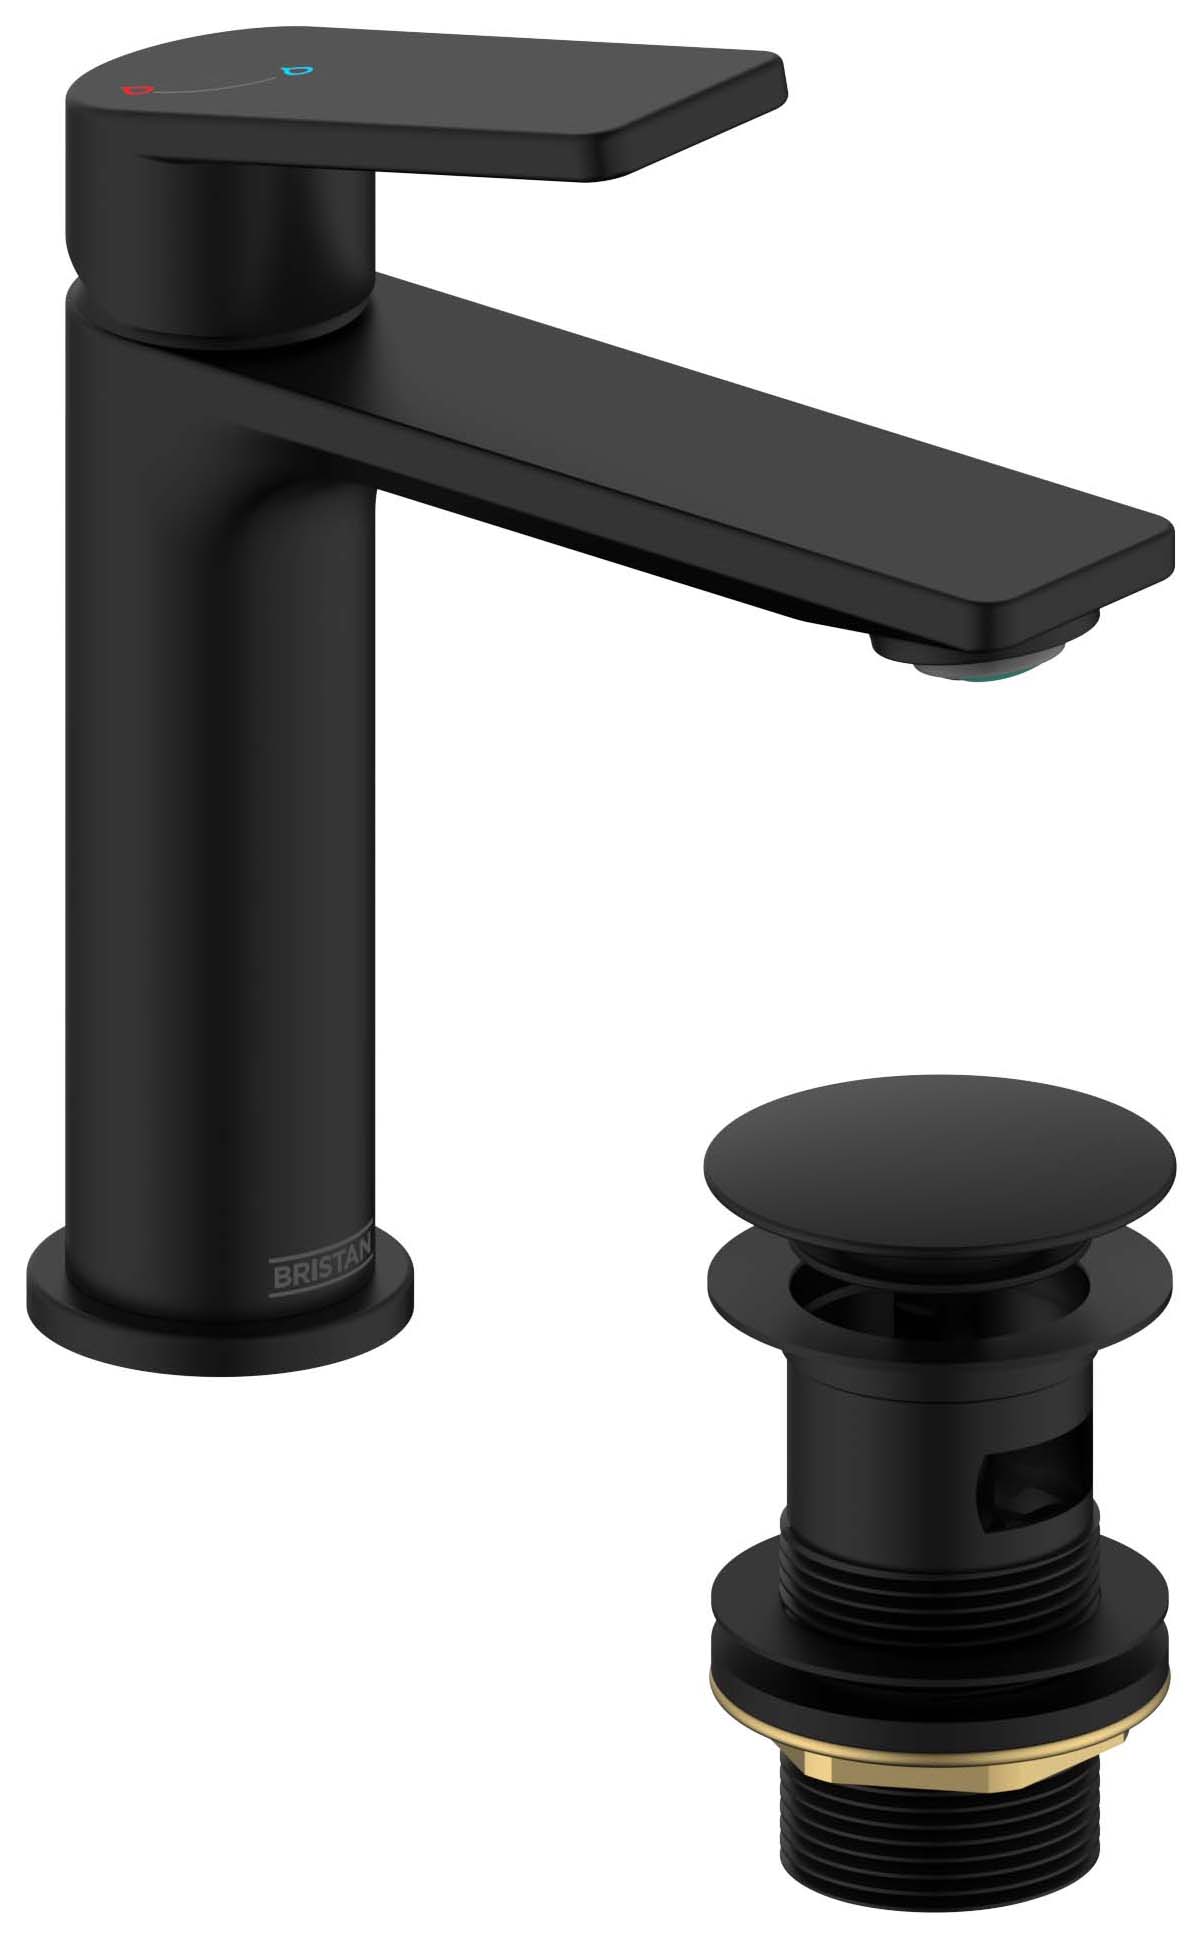 Image of Bristan Frammento Eco Start Basin Mixer with Clicker Waste - Black